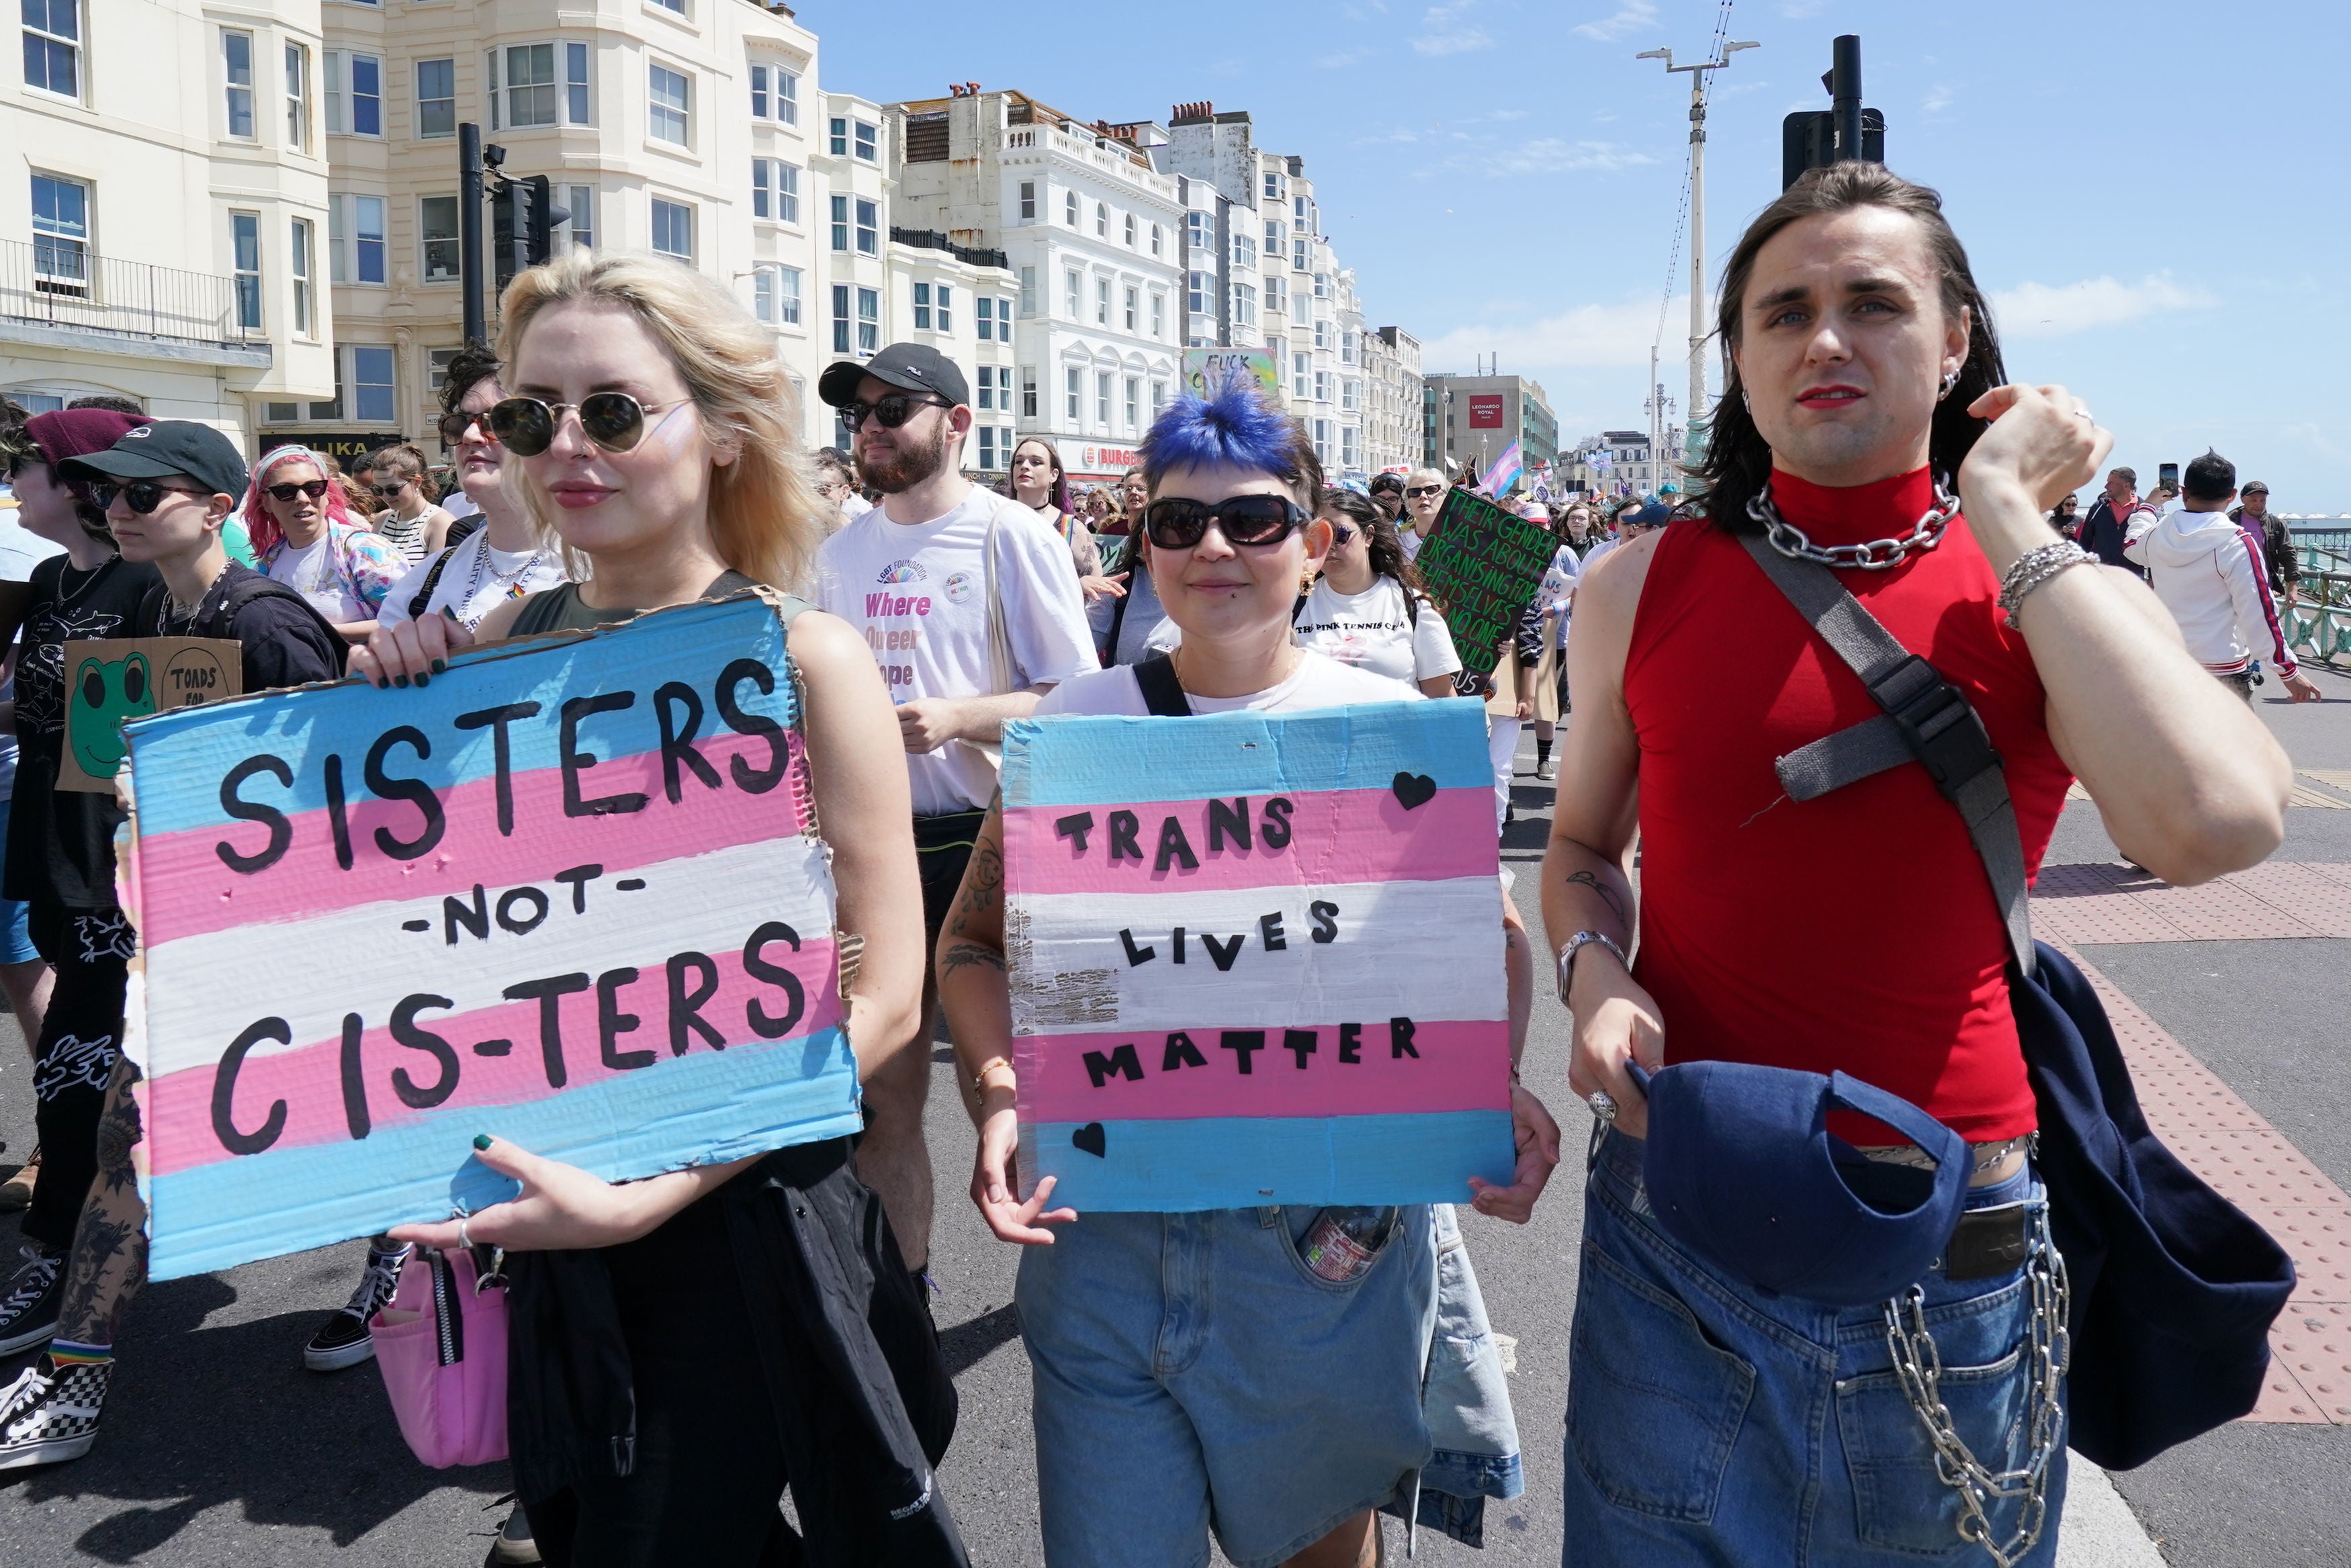 People take part in a Trans Pride protest march in Brighton